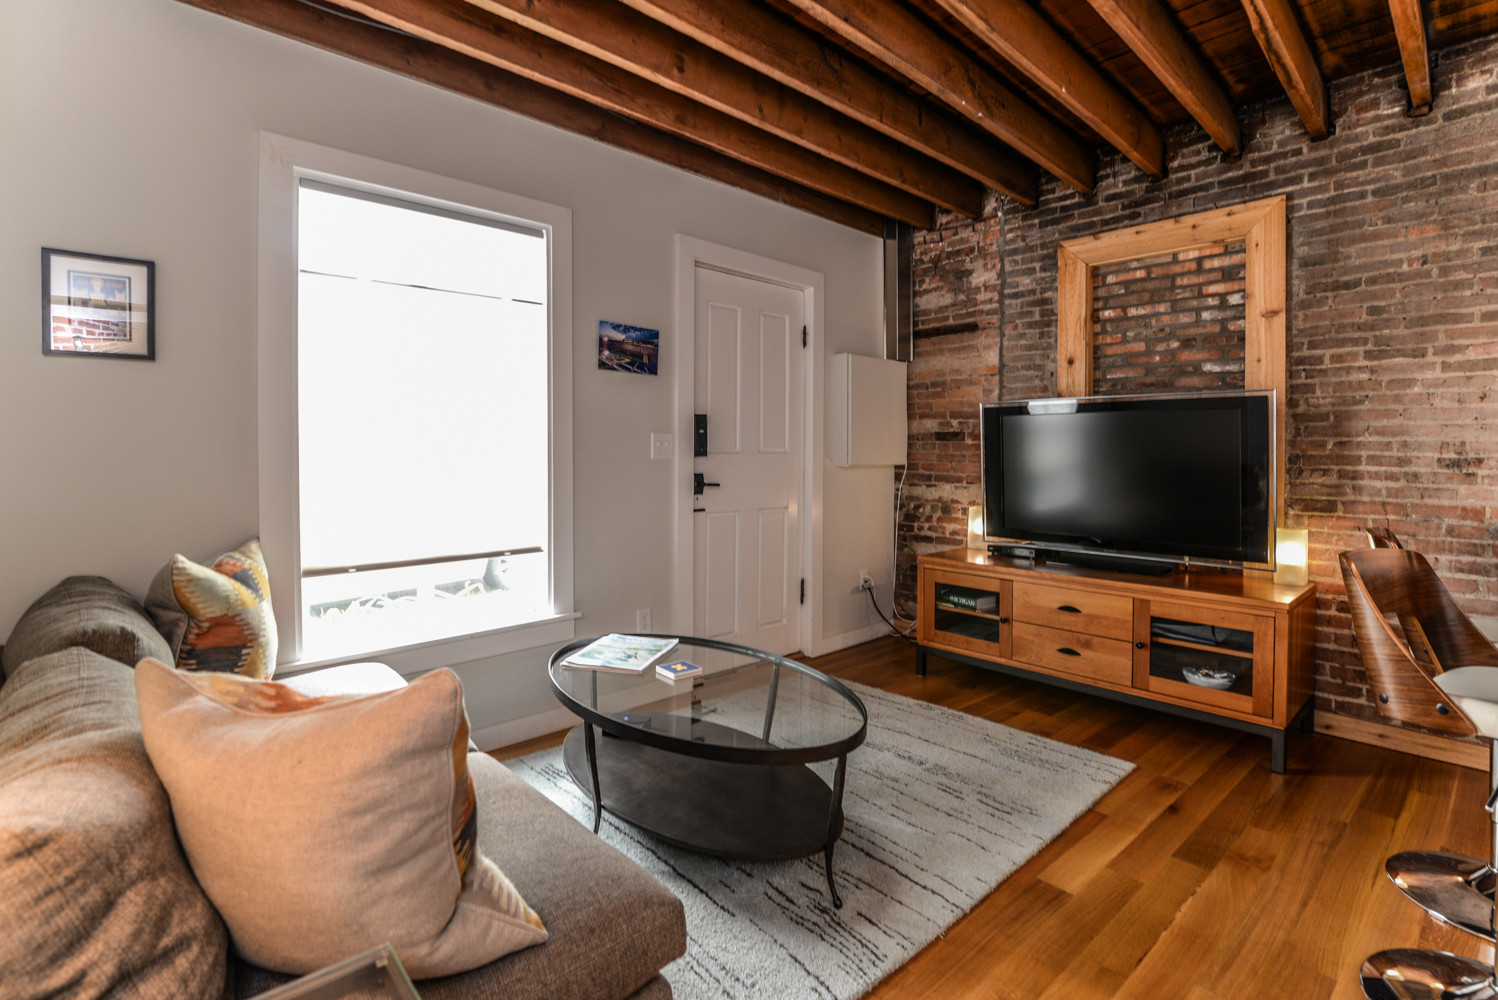 The exposed wood beams and brick give instant warmth to the carriage house loft. Reclaimed wood floors with a natural clear coat finish provide just enough color to the neutral palette of furniture an